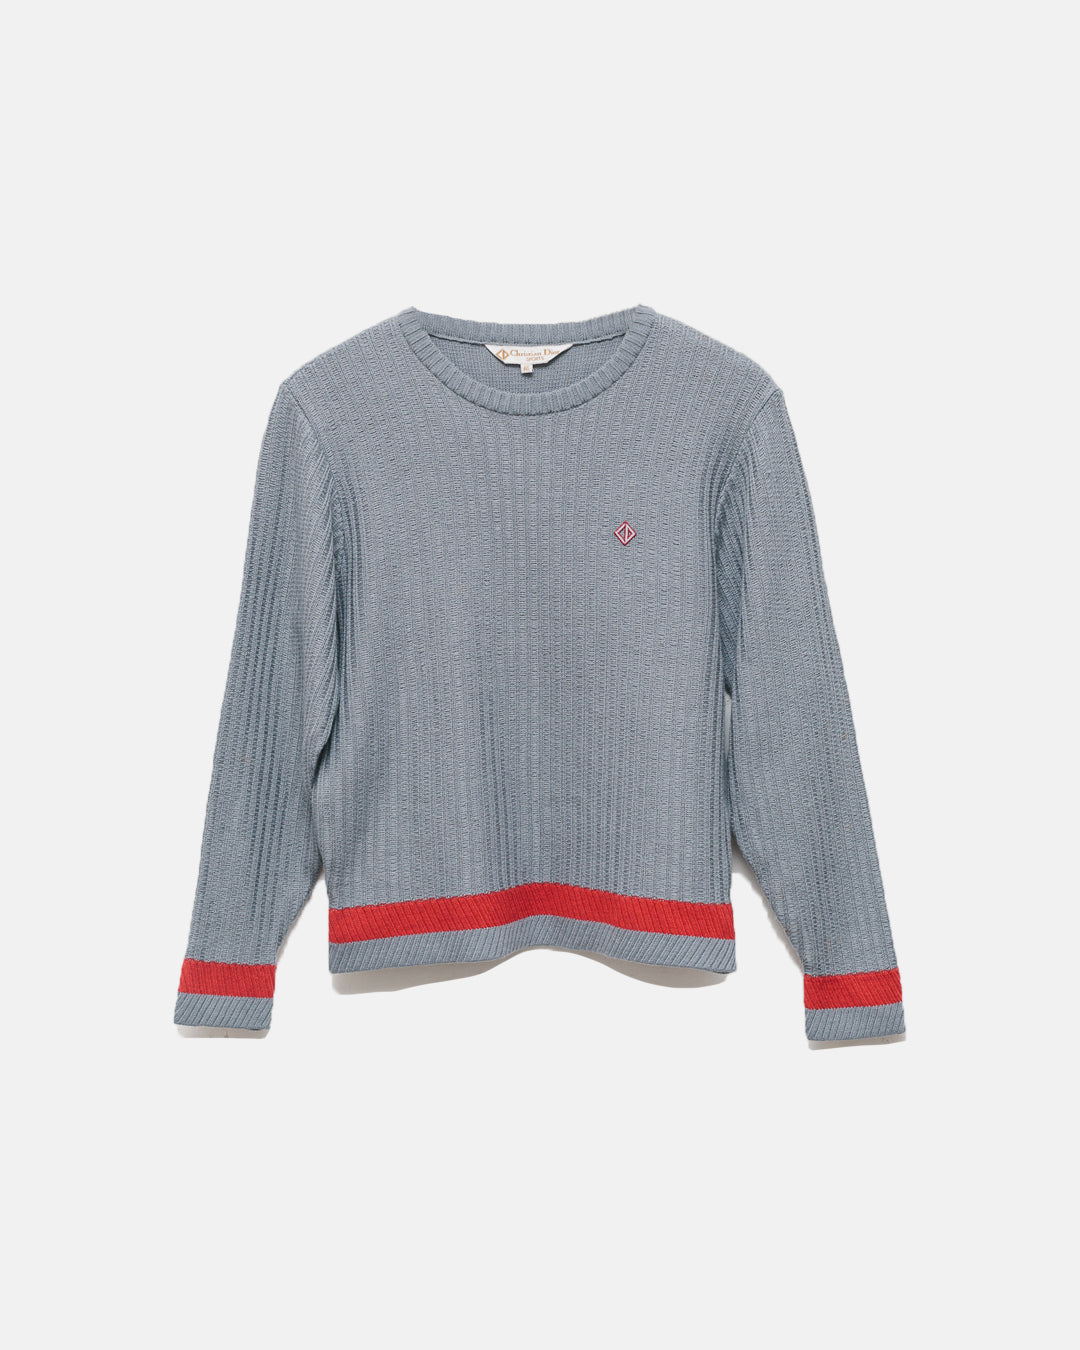 Christian Dior Sports Chunky Knit Pullover